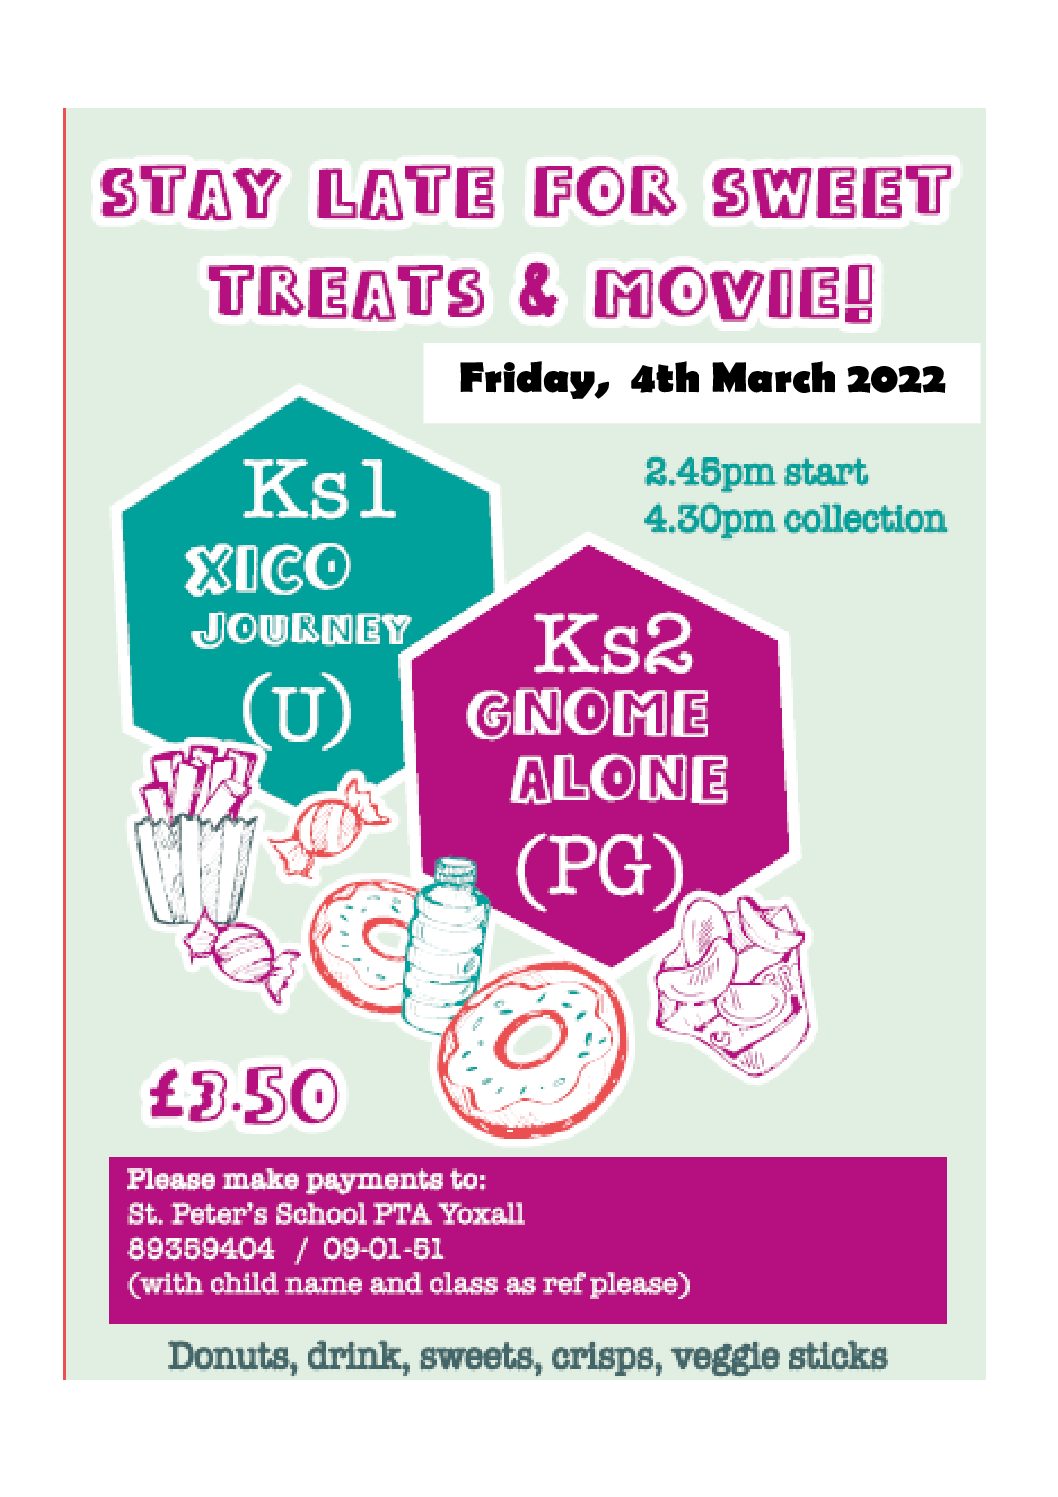 Sweet Treats and Movie Night – Date change now Friday 4th March 2022